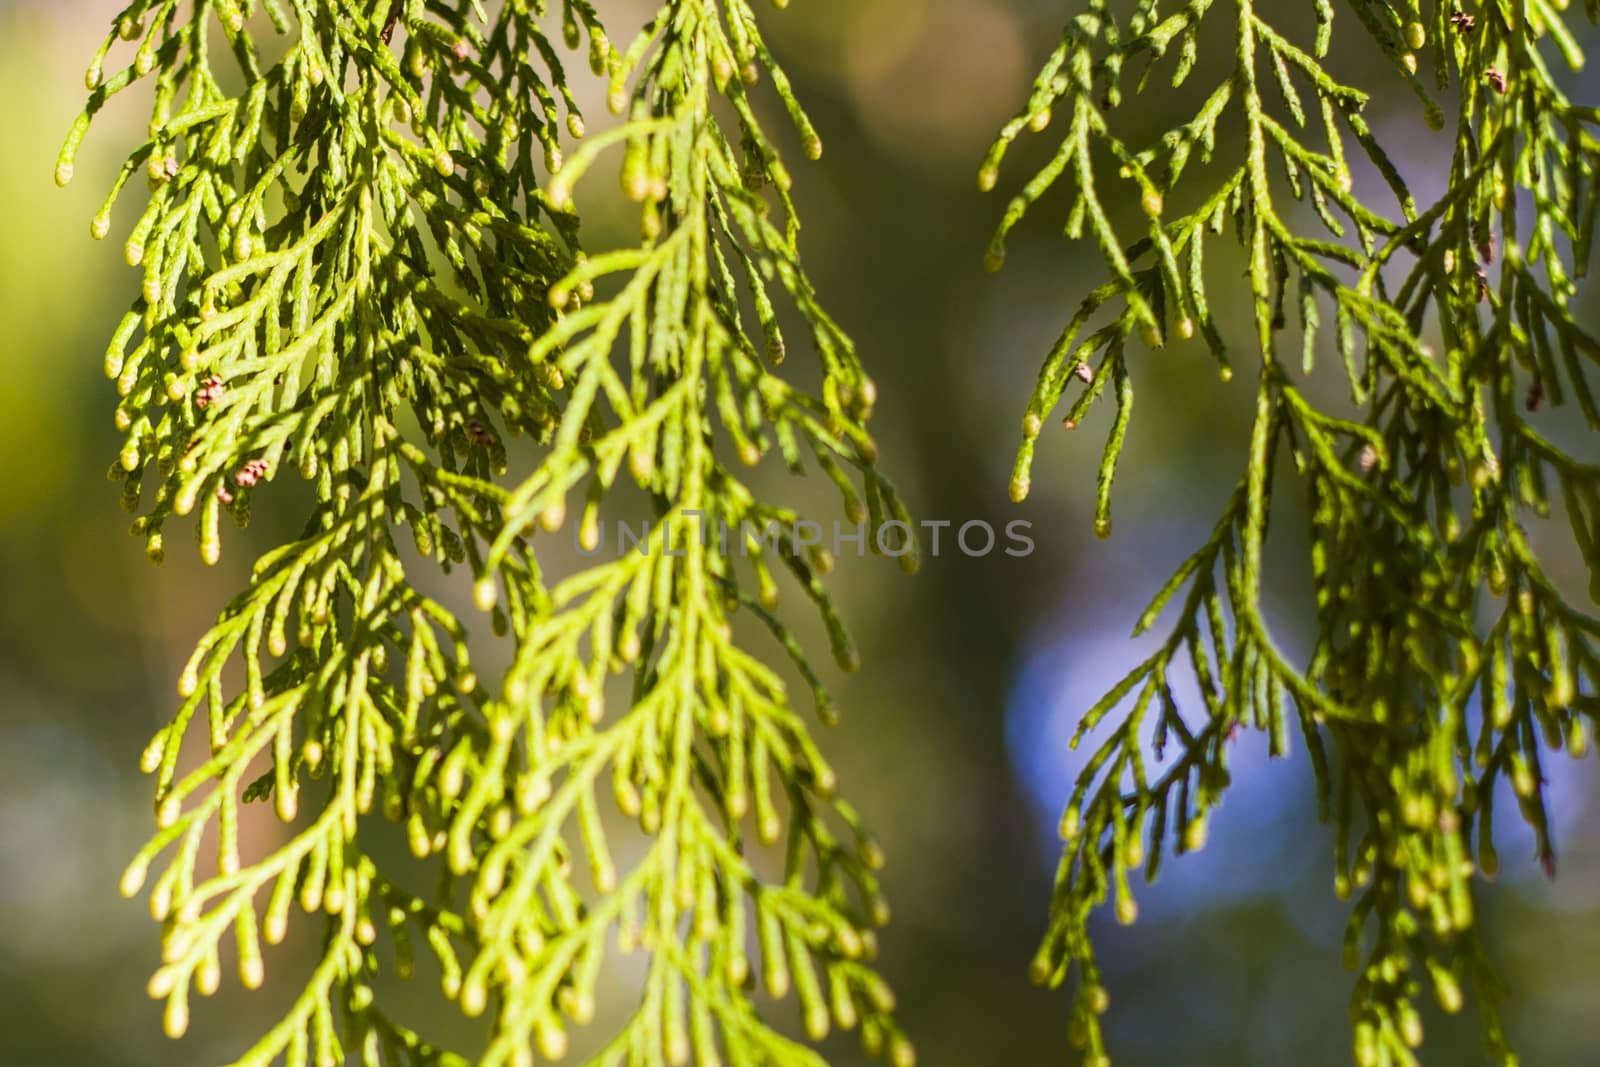 Pine tree leaves close-up and macro, green nature background by Taidundua